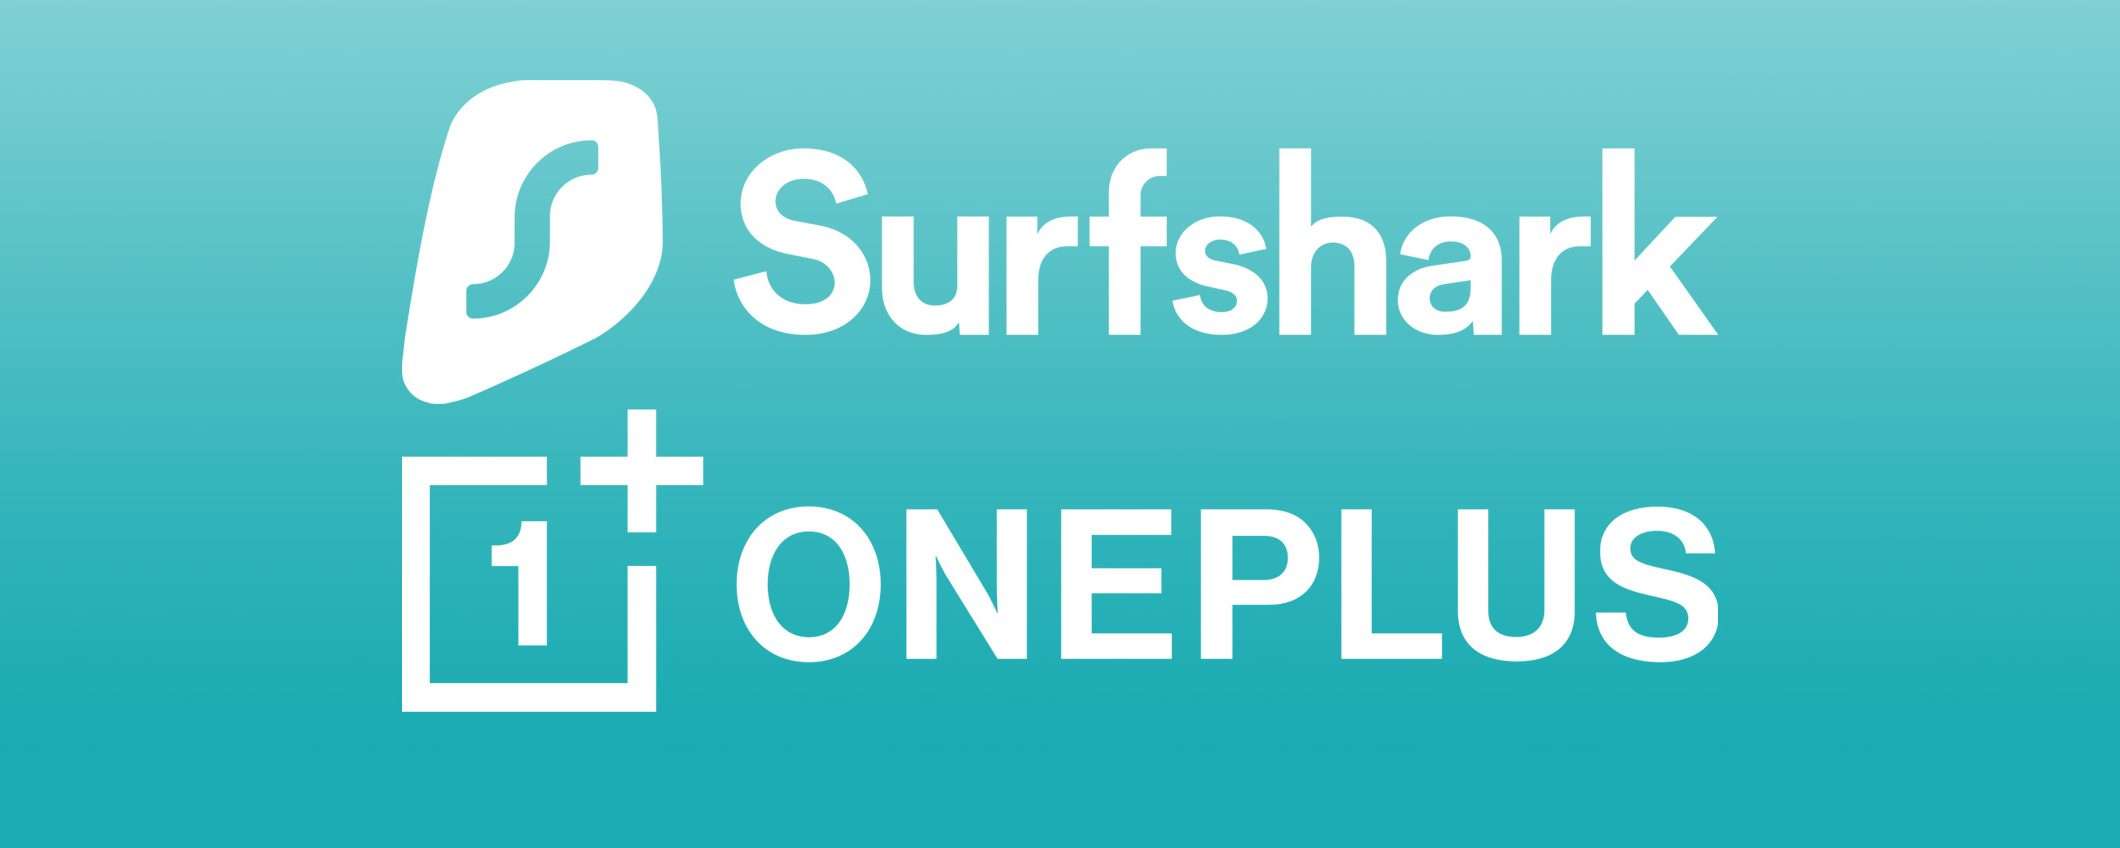 Surfshark e OnePlus insieme per il Red Cable Club